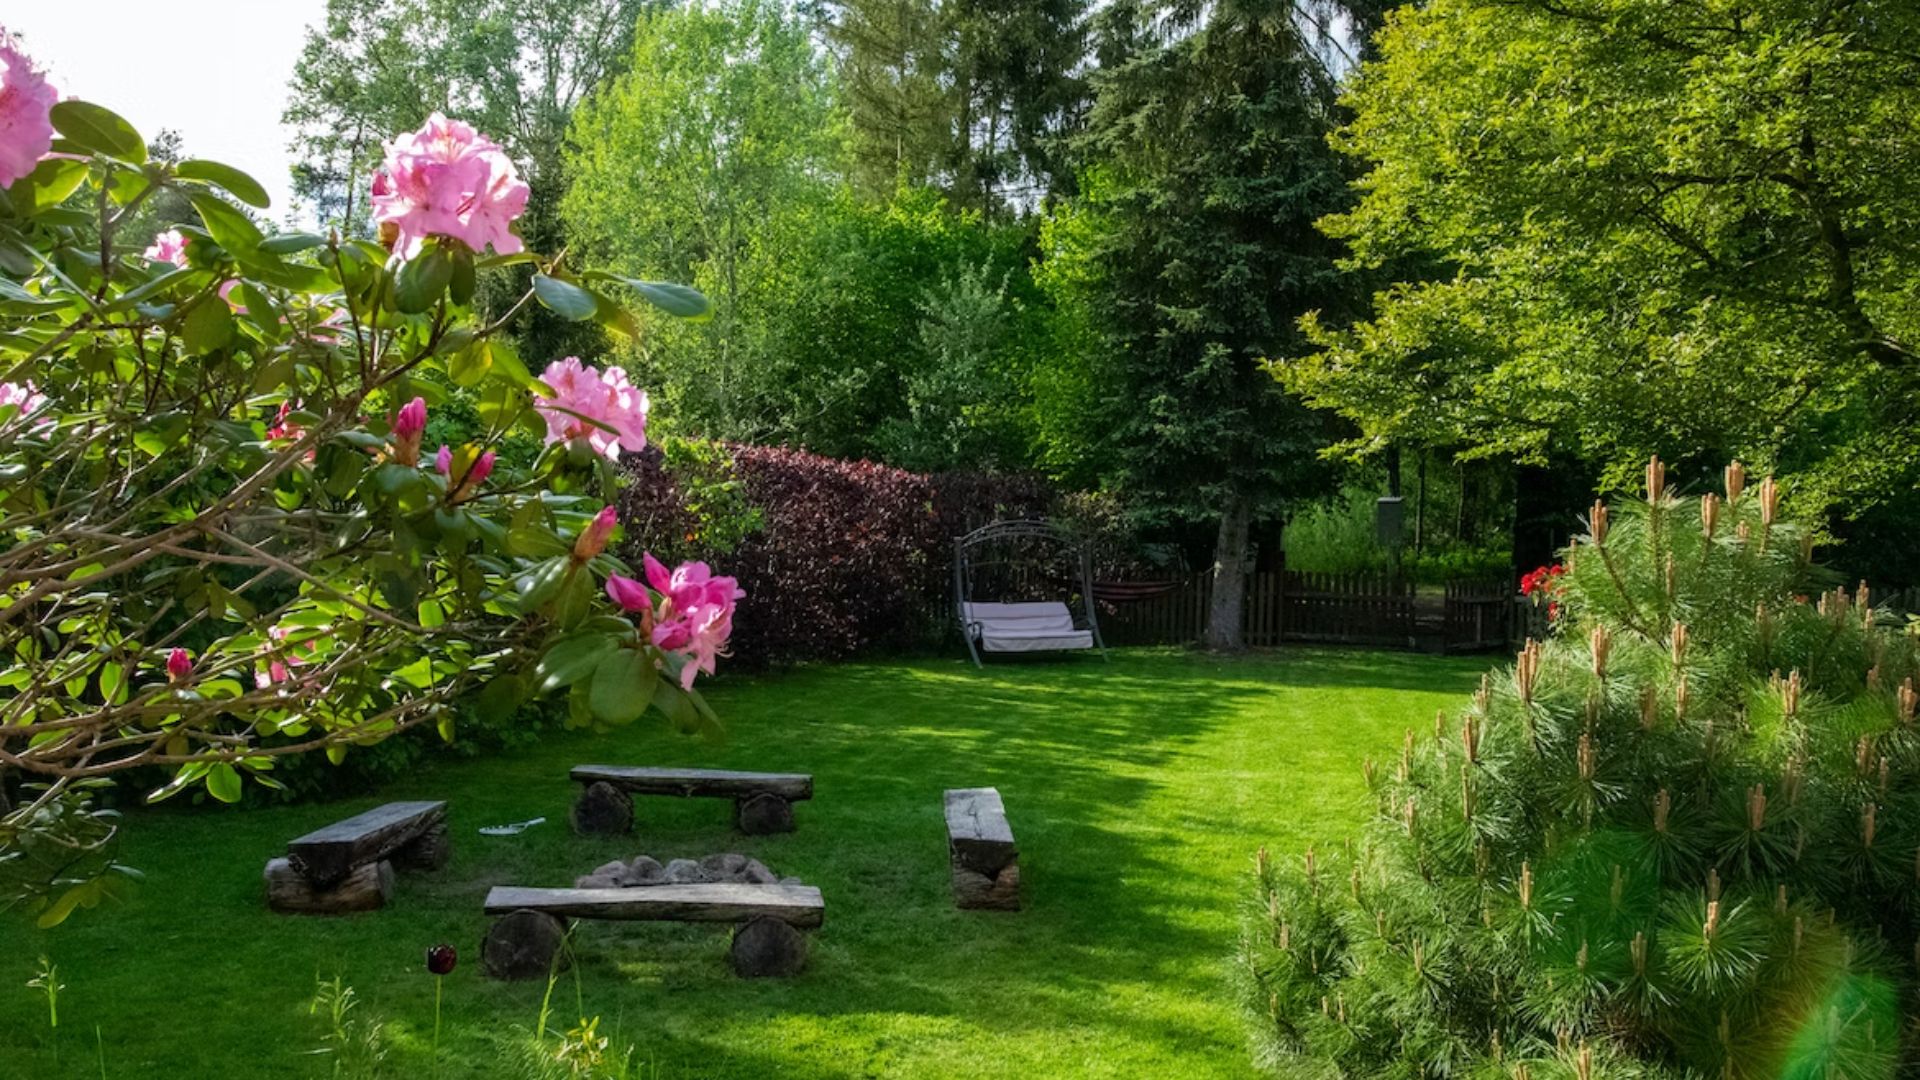 Gardening Costs Explained: How to Plan Your Backyard Garden